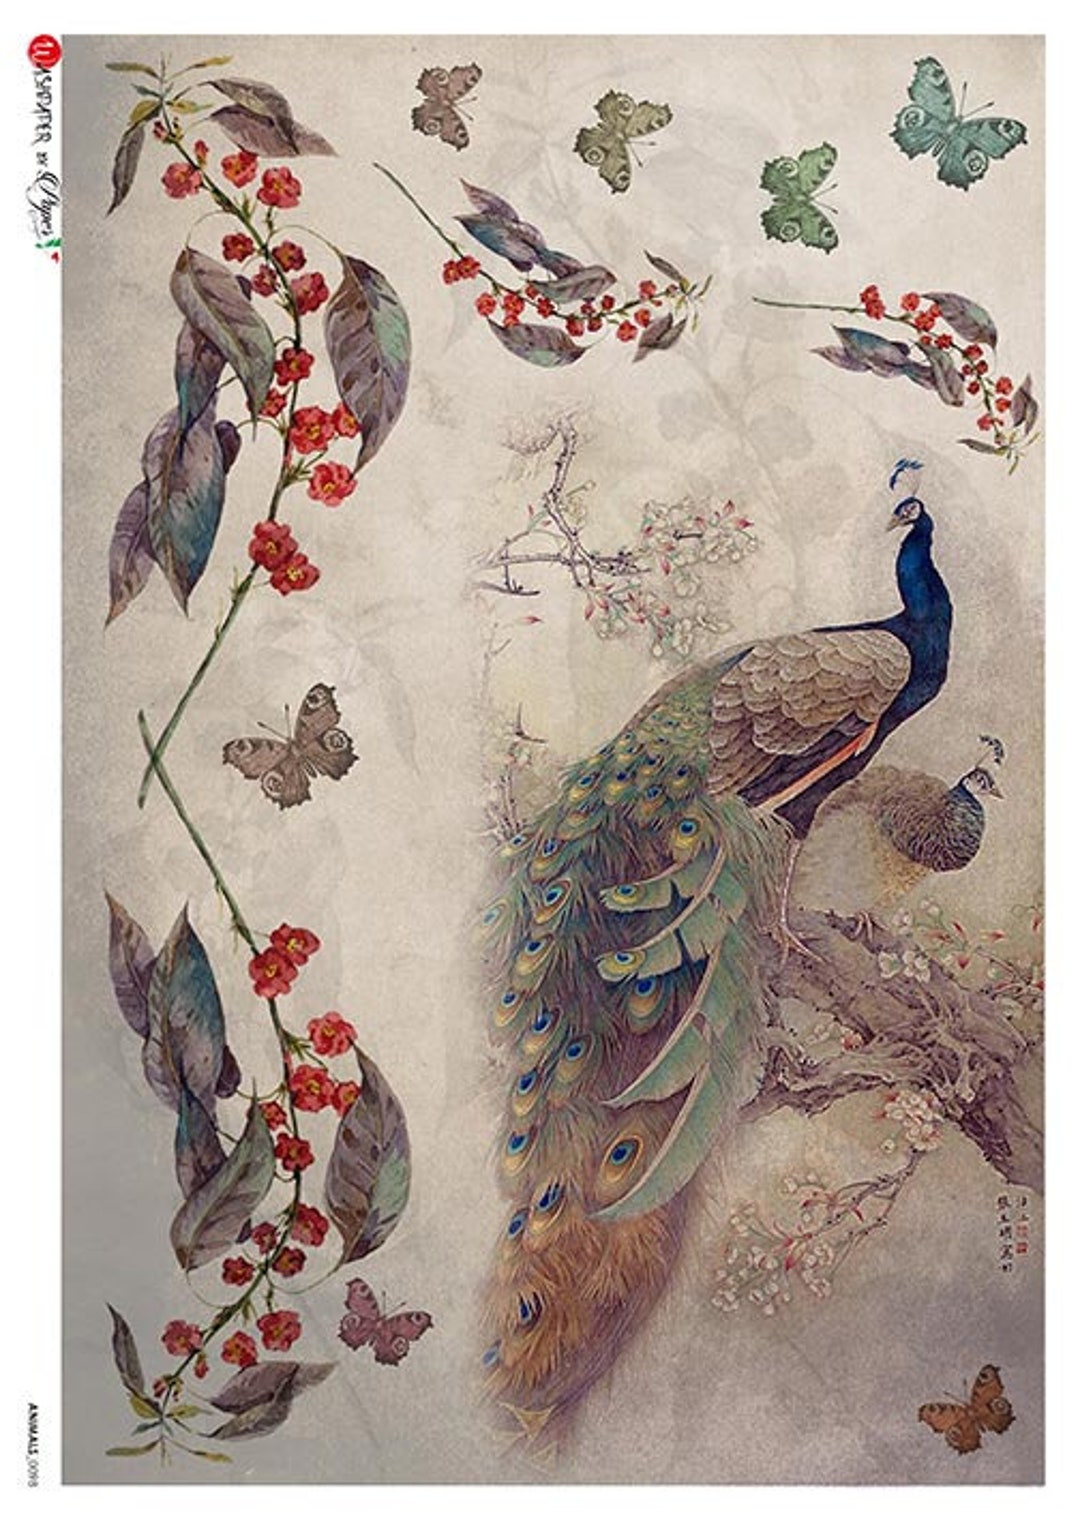 Buy Peacock Feathers Decoupage Paper A4 Online | CrafTreat